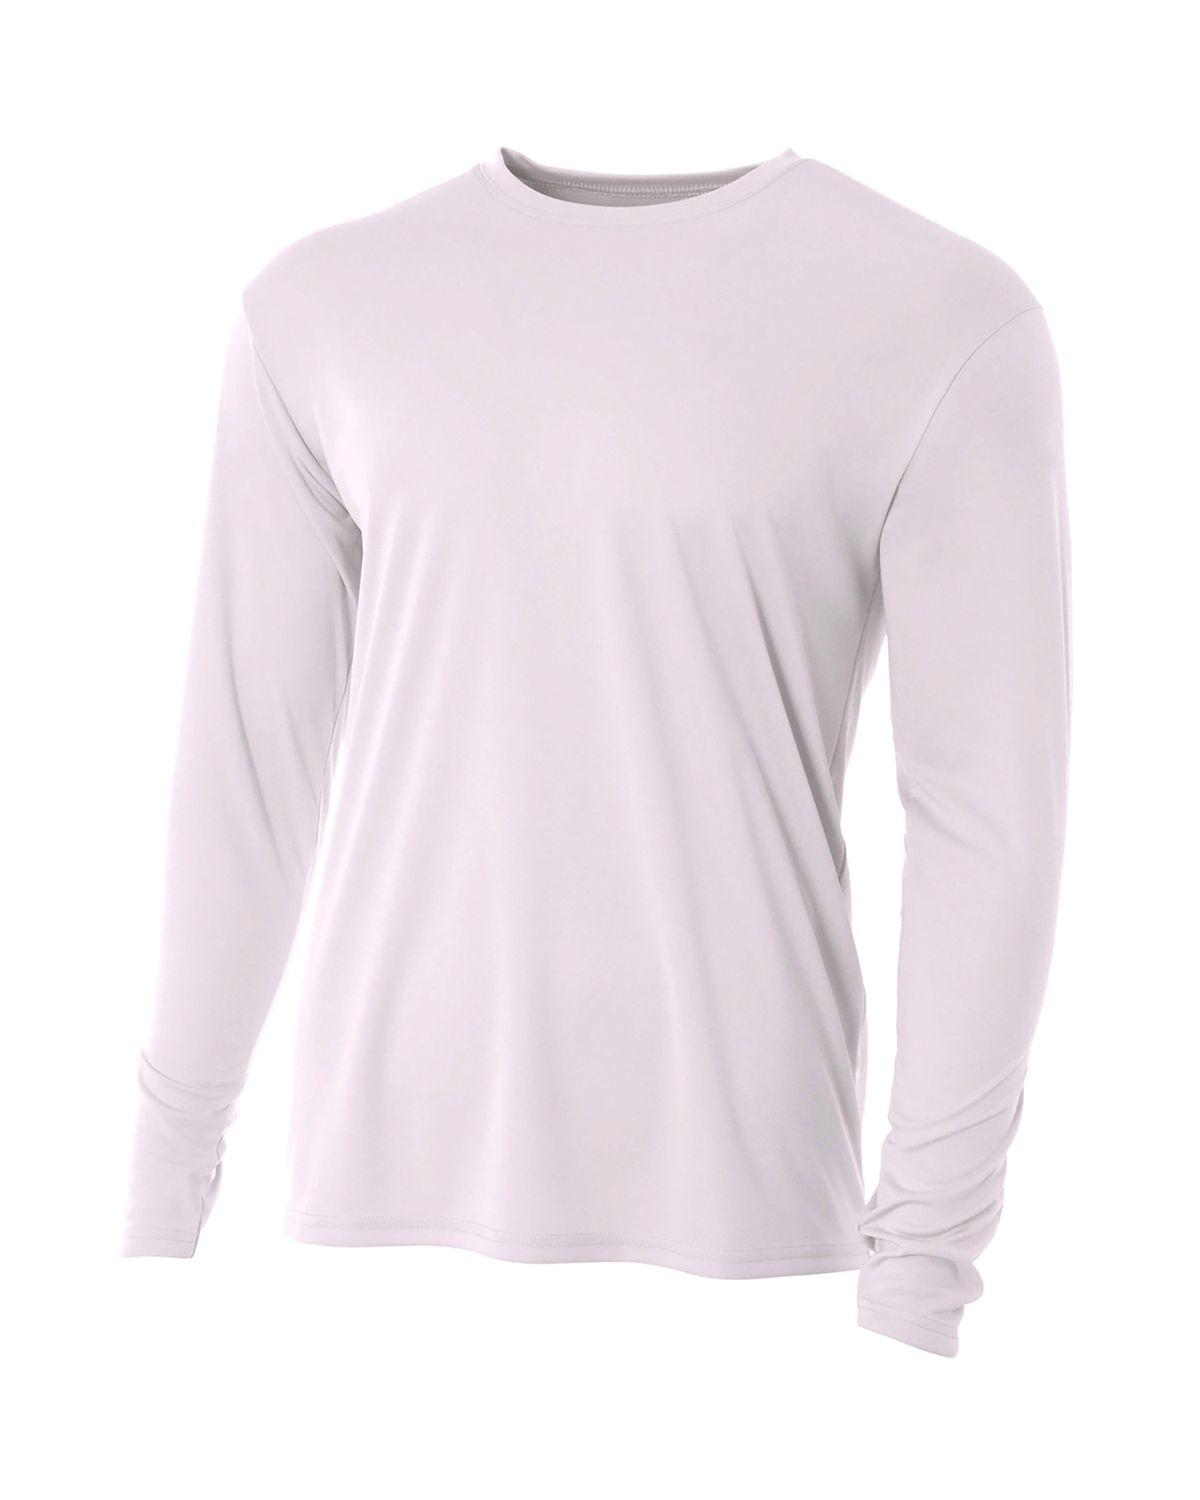 'A4 NB3165 Youth Long Sleeve Cooling Performance Crew Shirt'